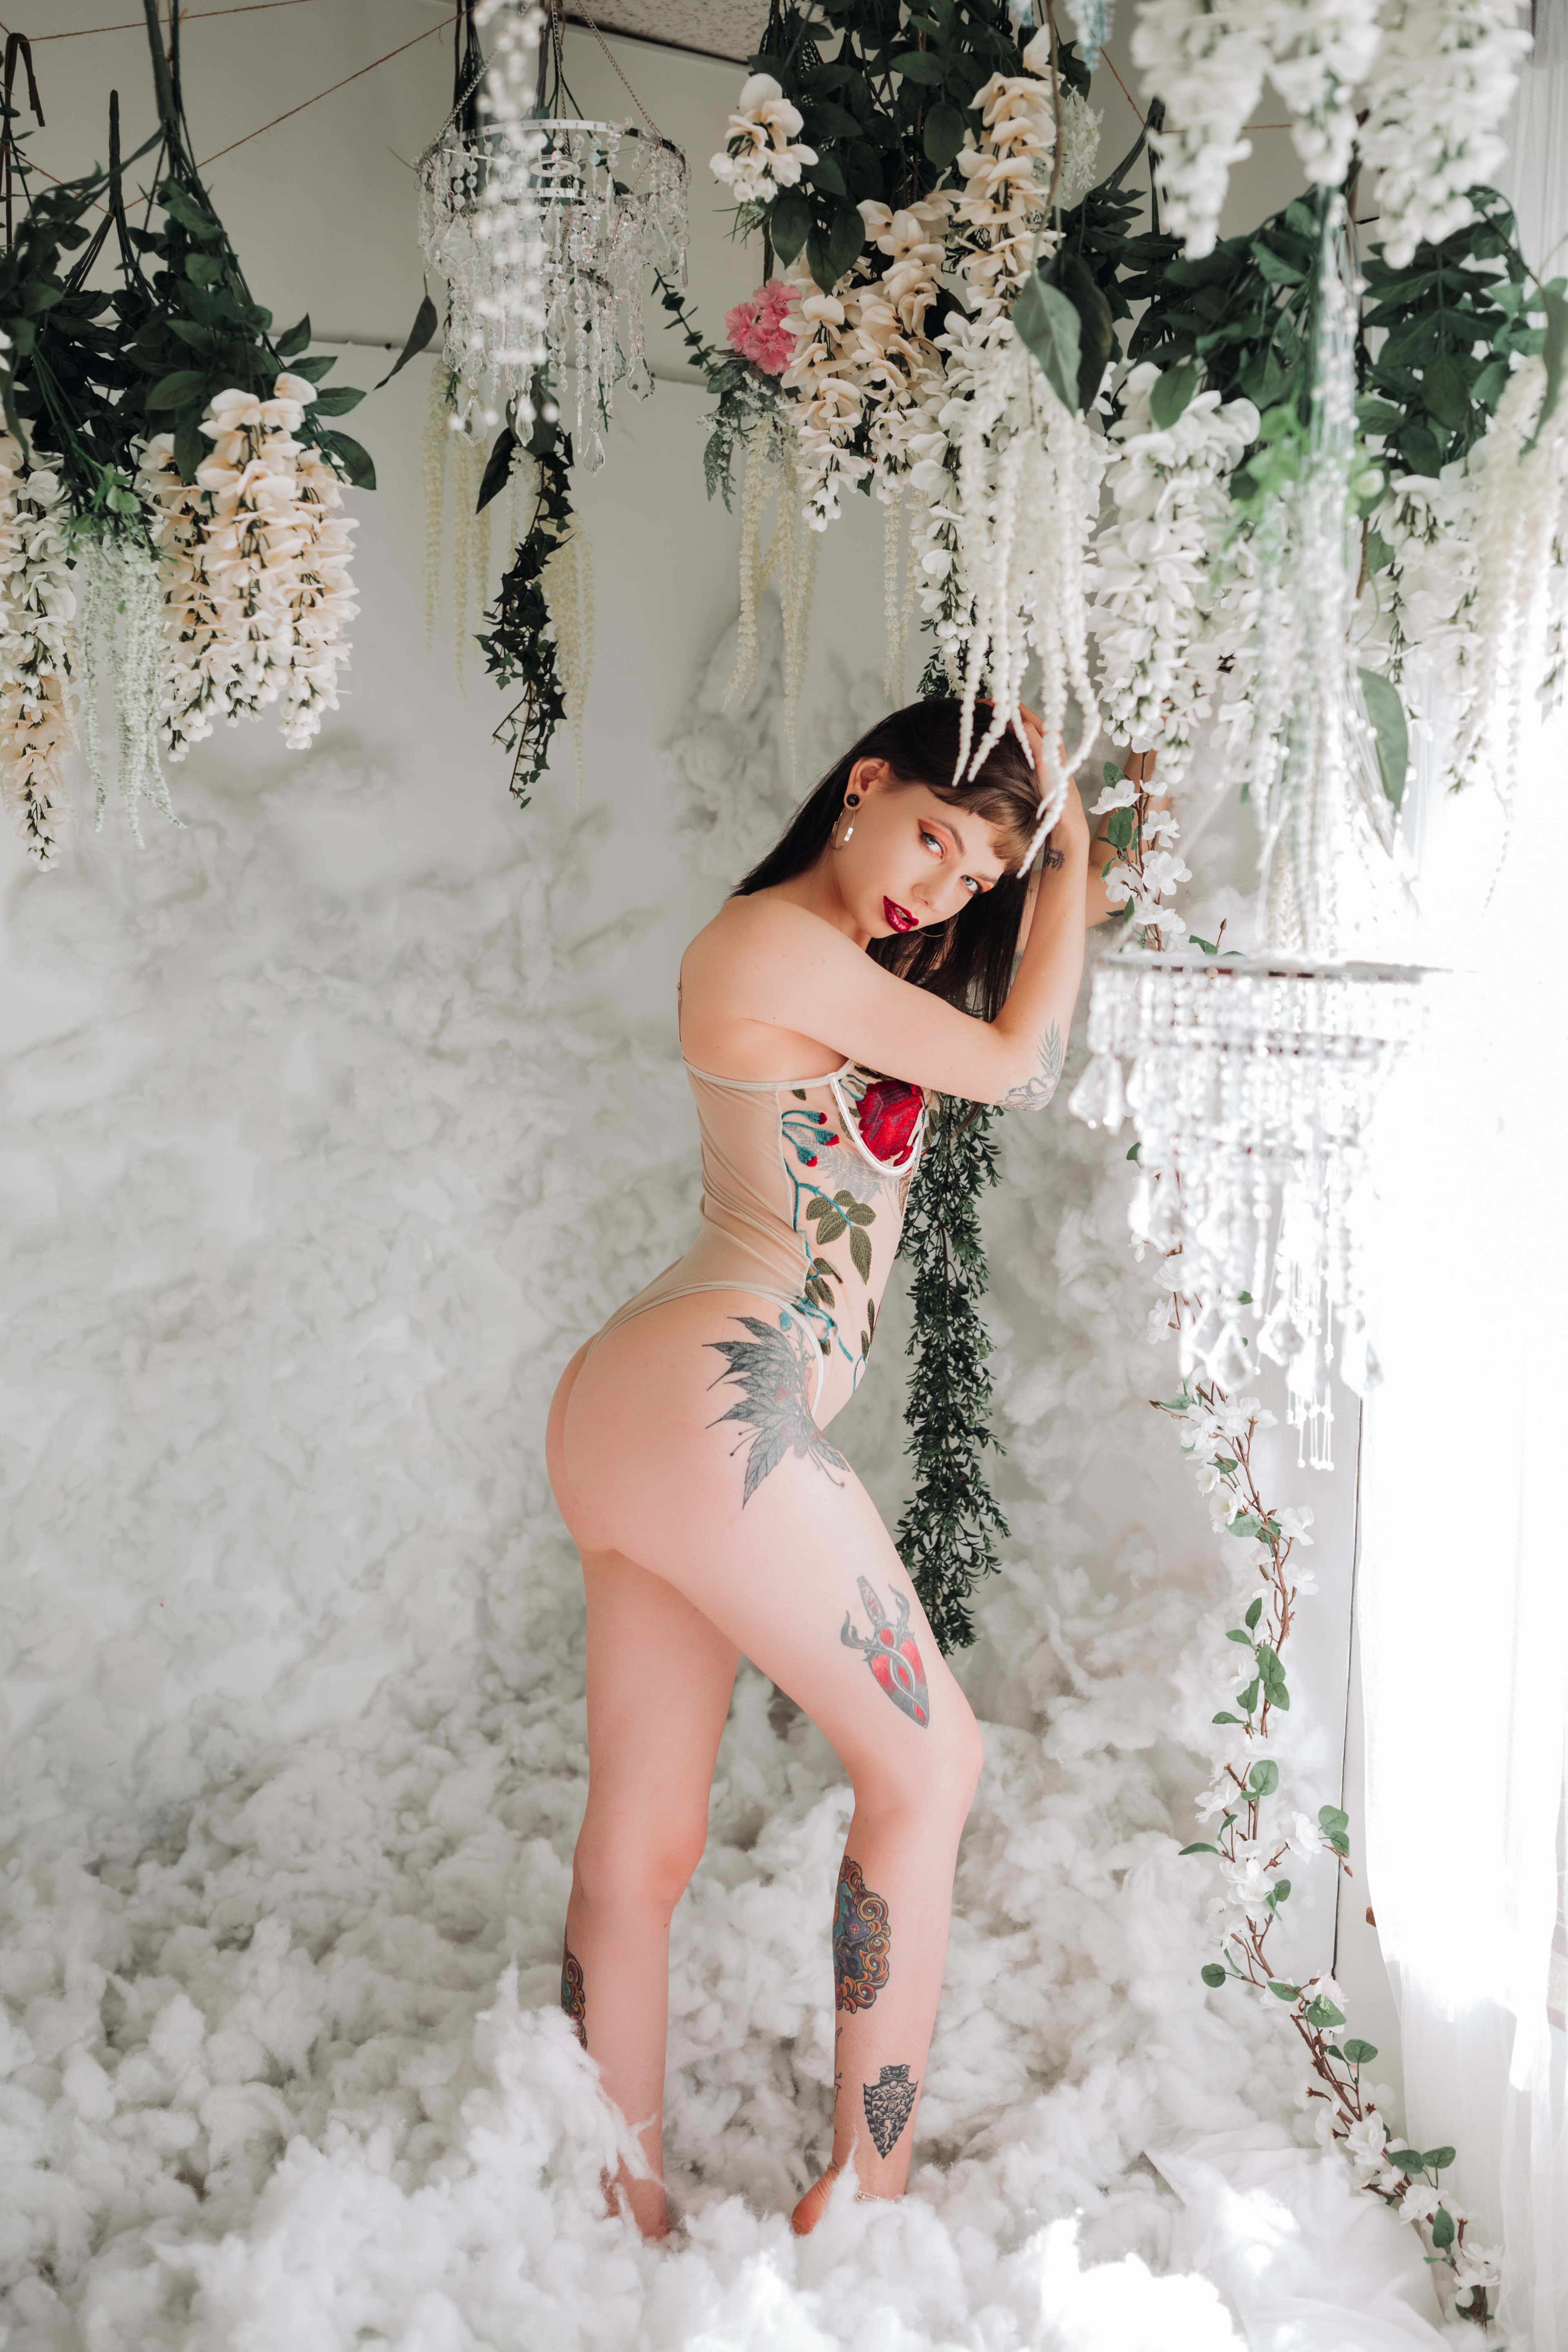 A woman with tattoos standing in a pile of cottons during a boudoir photoshoot.